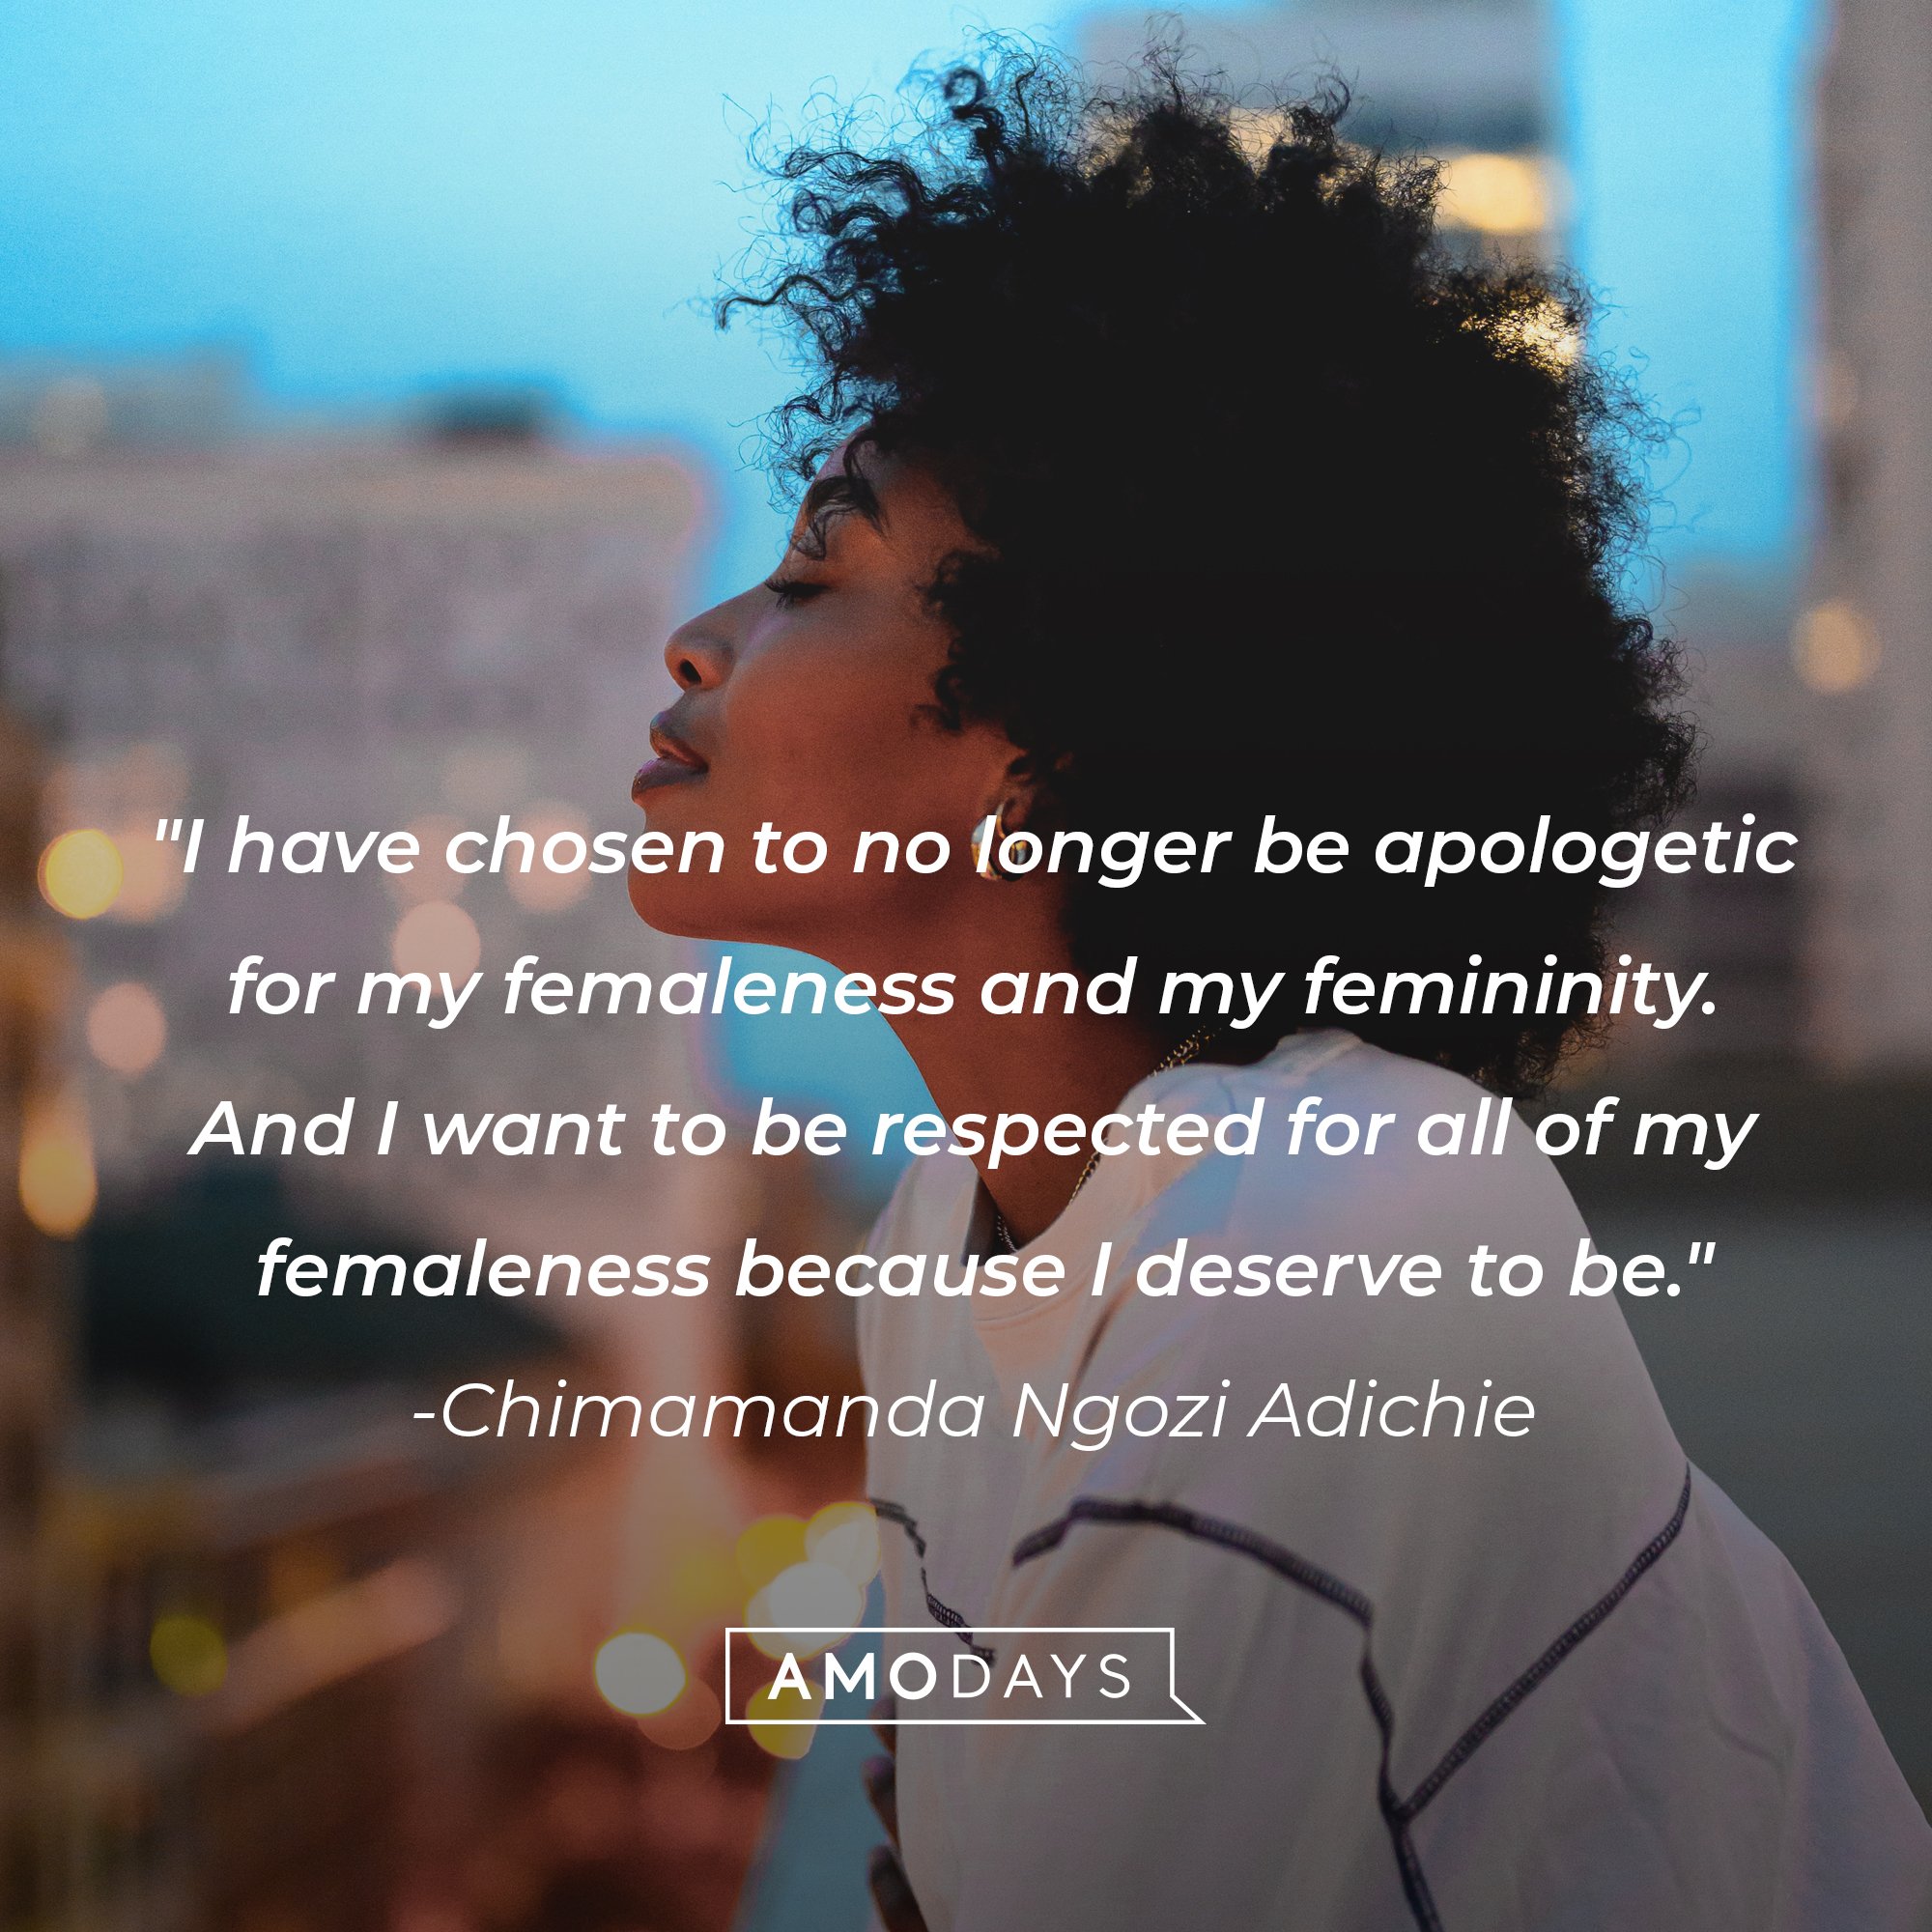 Chimamanda Ngozi Adichie’s quote: "I have chosen to no longer be apologetic for my femaleness and my femininity. And I want to be respected for all of my femaleness because I deserve to be." | Image: AmoDays